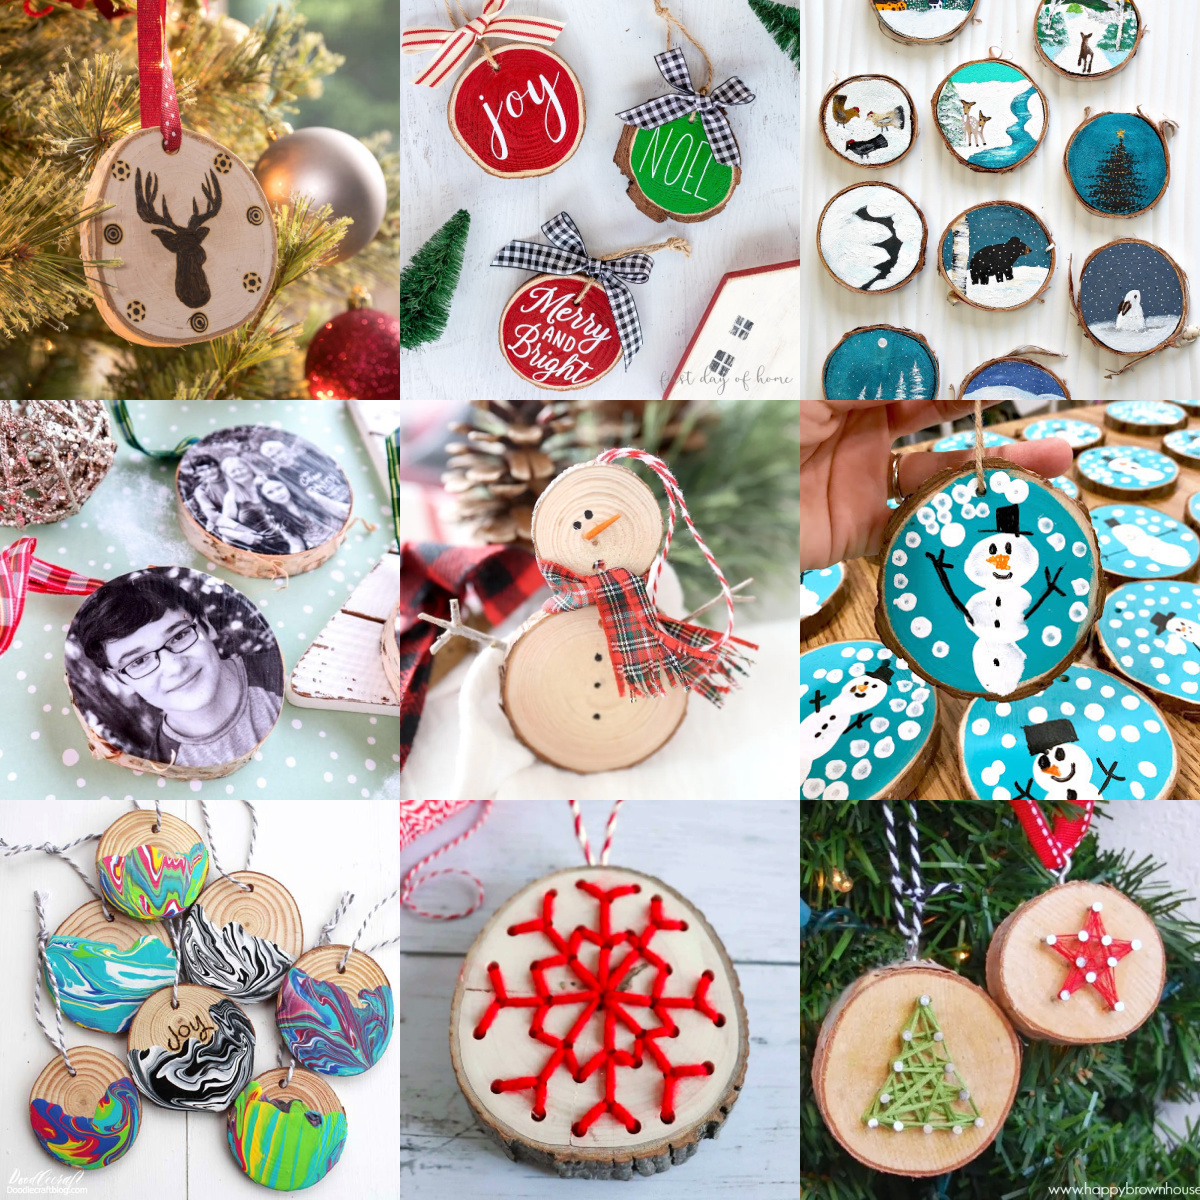 Wood Slice Ornament Ideas for Your Tree - DIY Candy